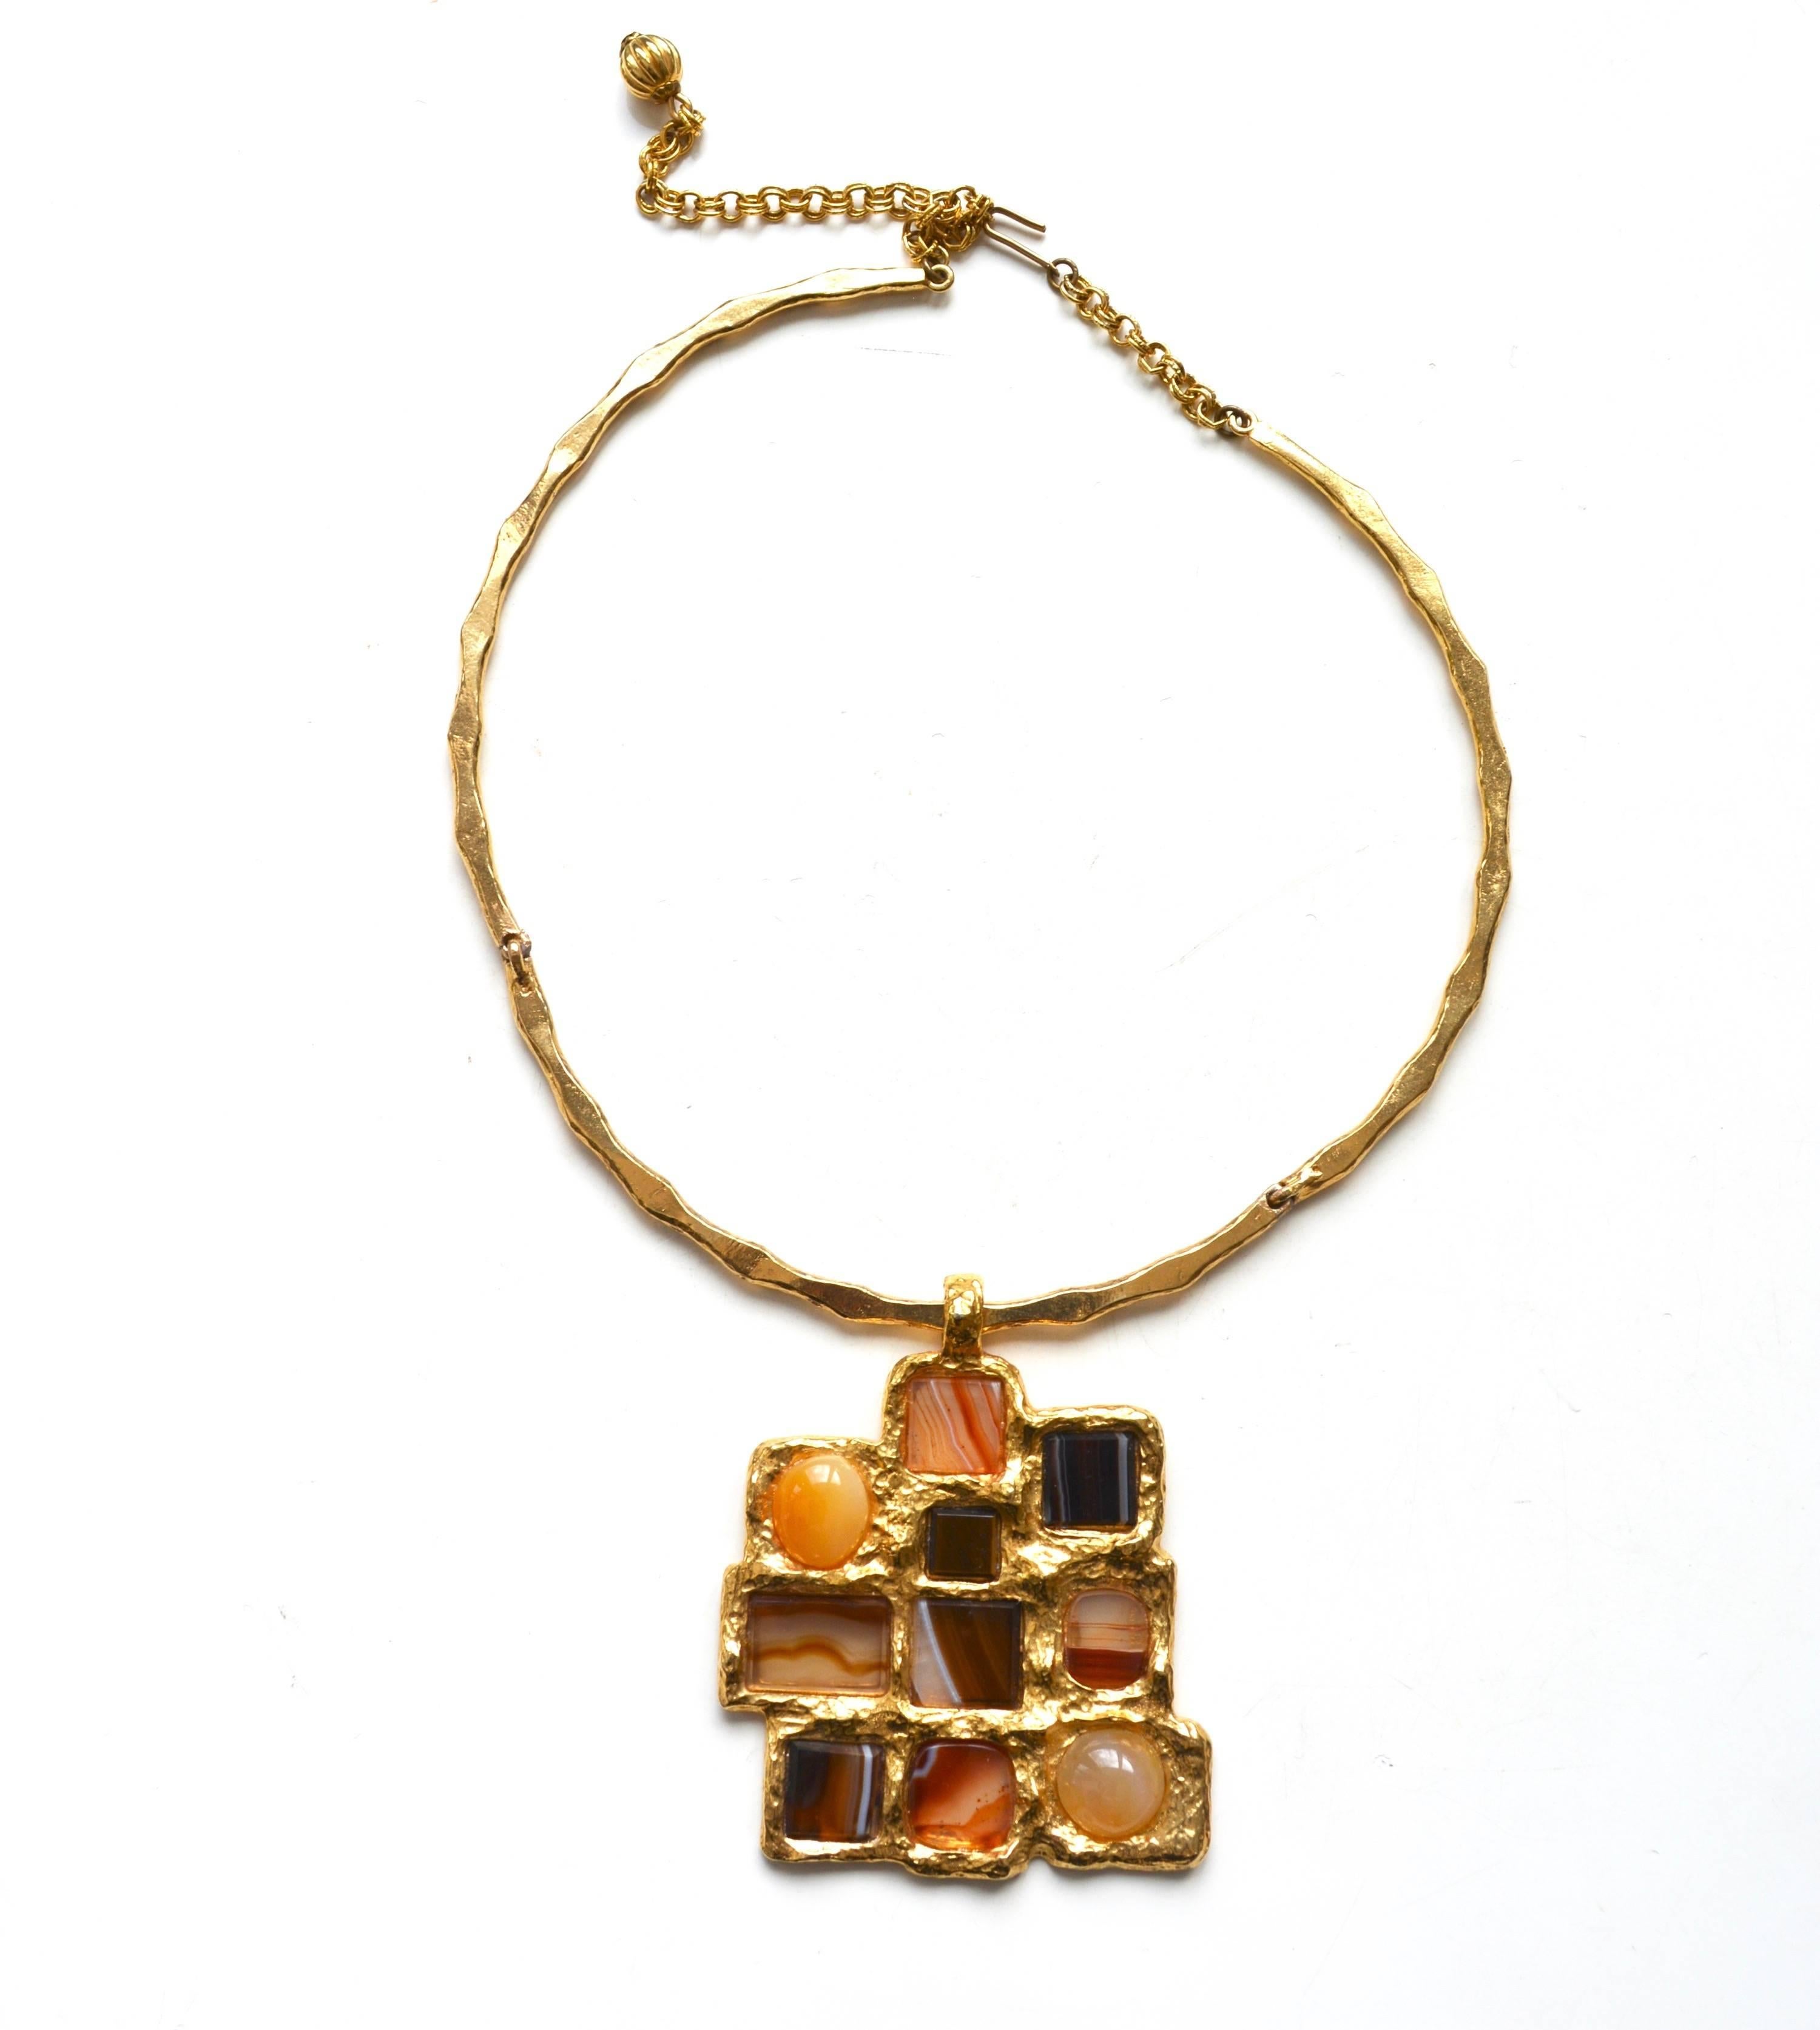 Signed Kenneth Jay Lane circa 1970s real agate geometric collar with gilt finish. Excellent condition. 3" long pendant. 16" long with a 4" extension allowing for about a 20" total length. 